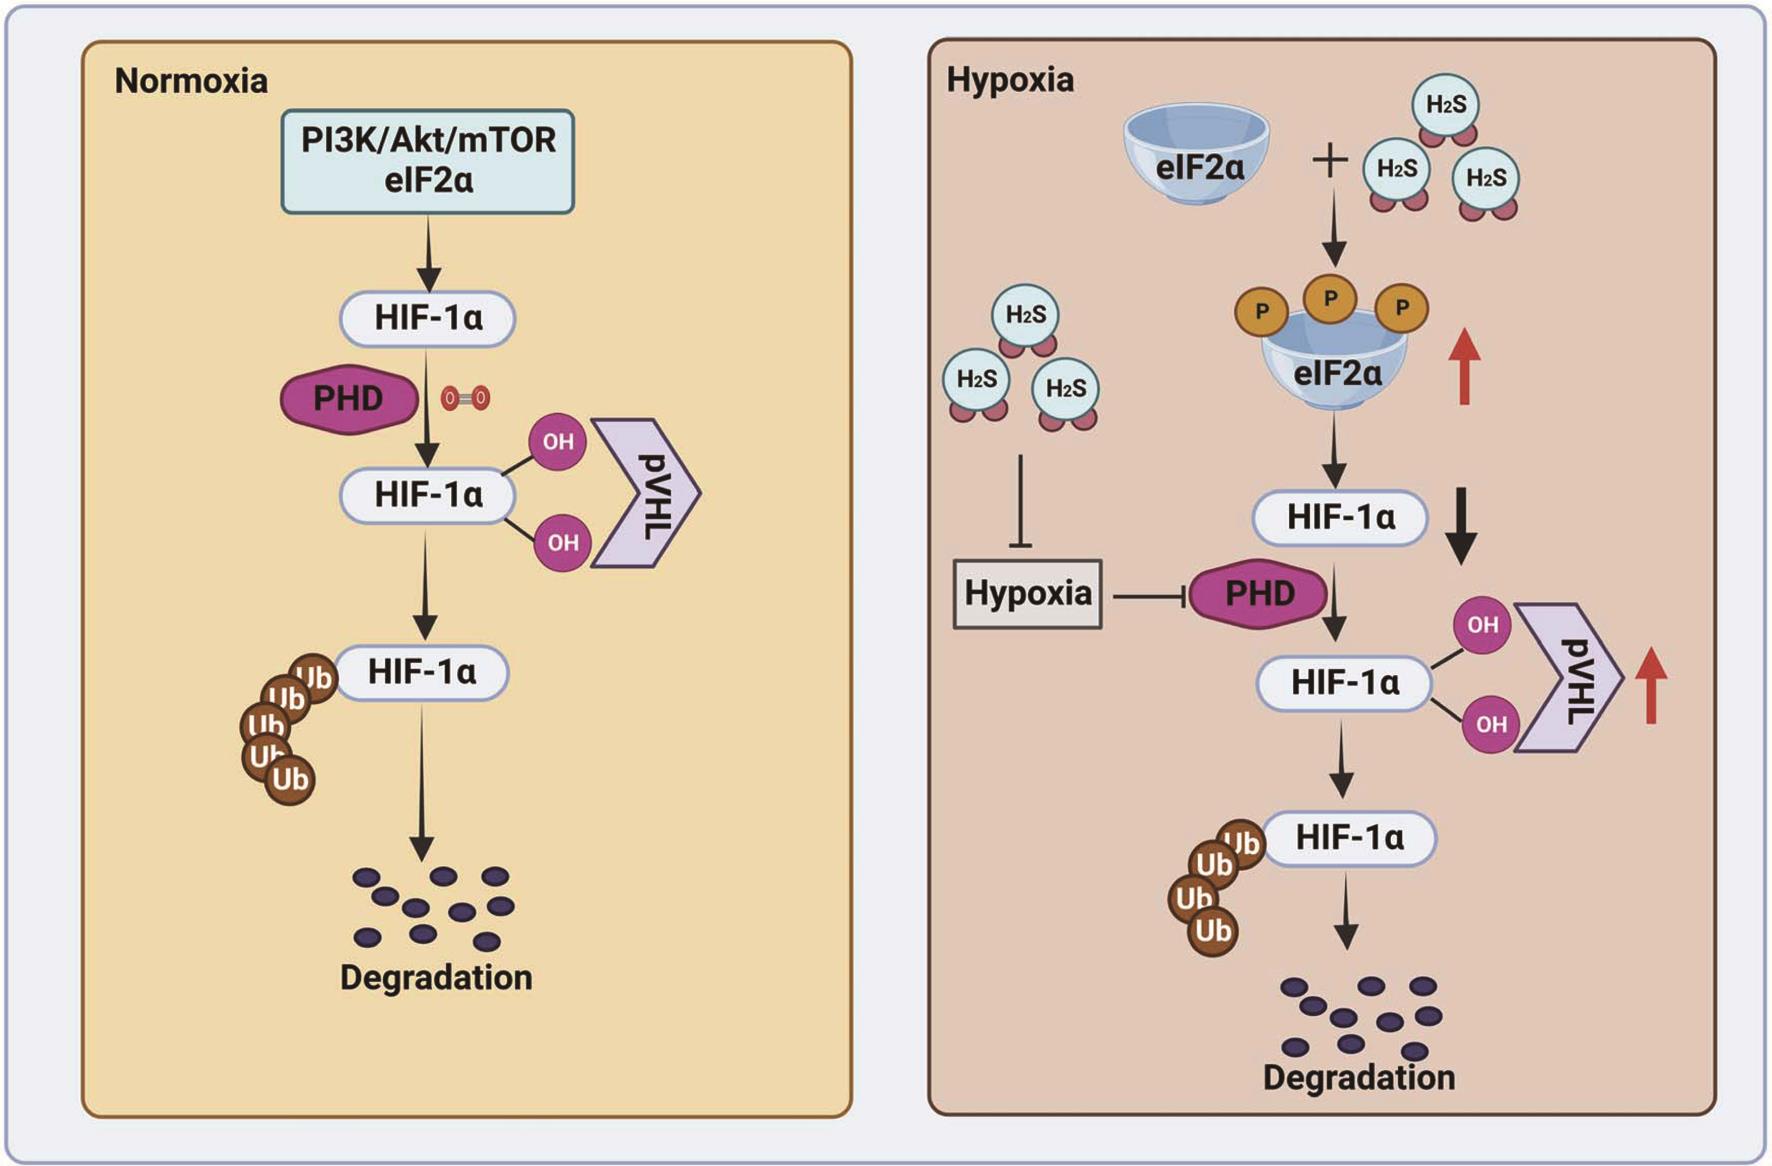 Pathways of HIF-1α synthesis/degradation under normoxic and hypoxic conditions.